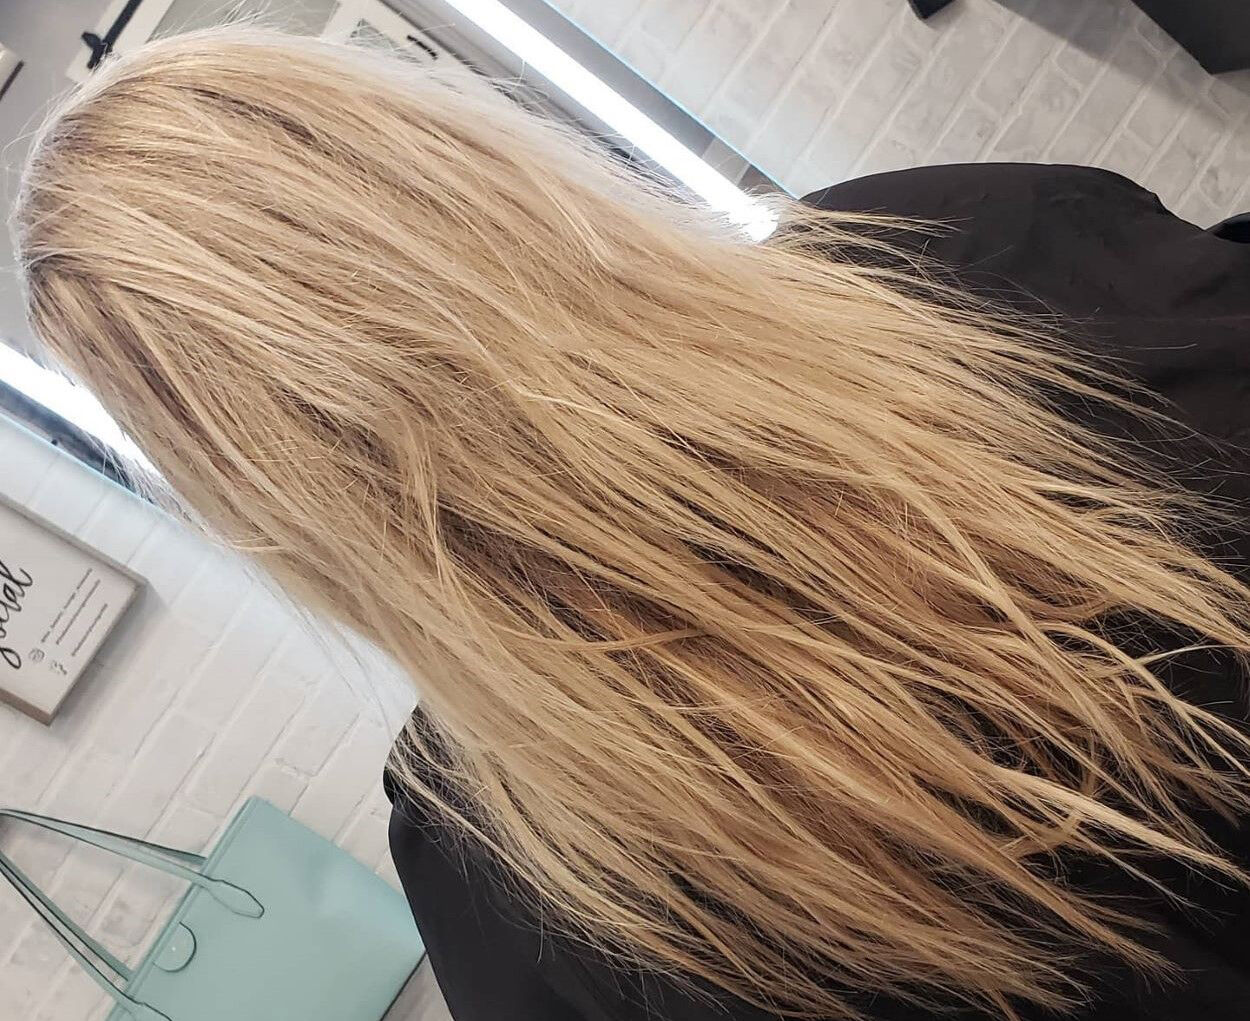 A detailed look at blonde hair exhibiting signs of damage and dryness, in need of repair.